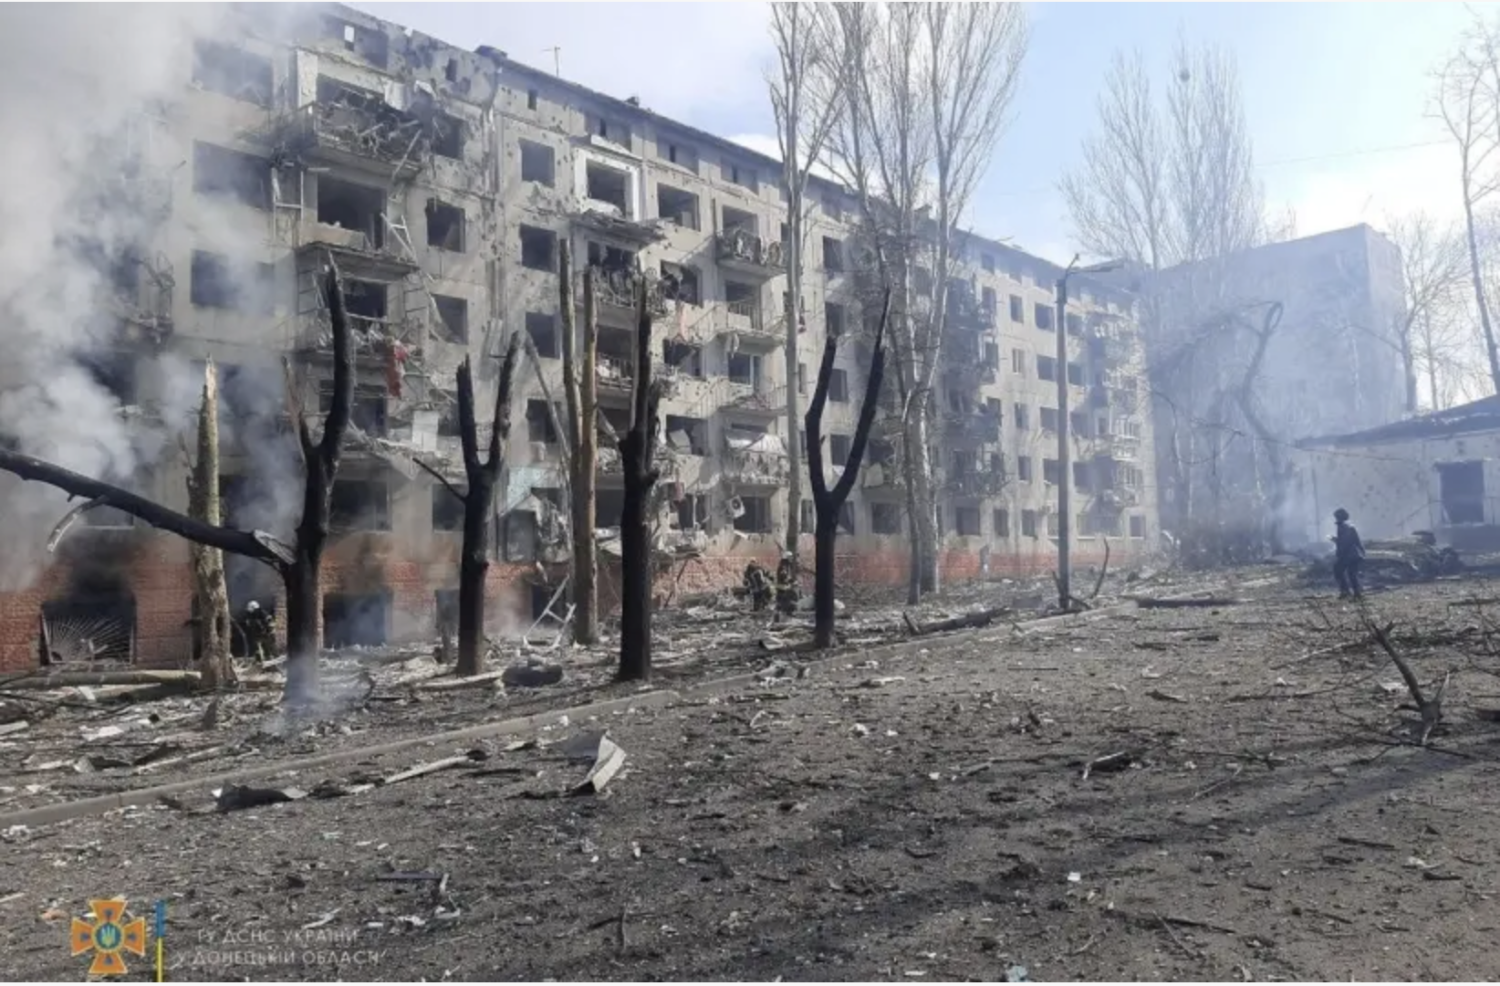 (photo credit: Press service of the State Emergency Service of Ukraine/Handout via REUTERS)